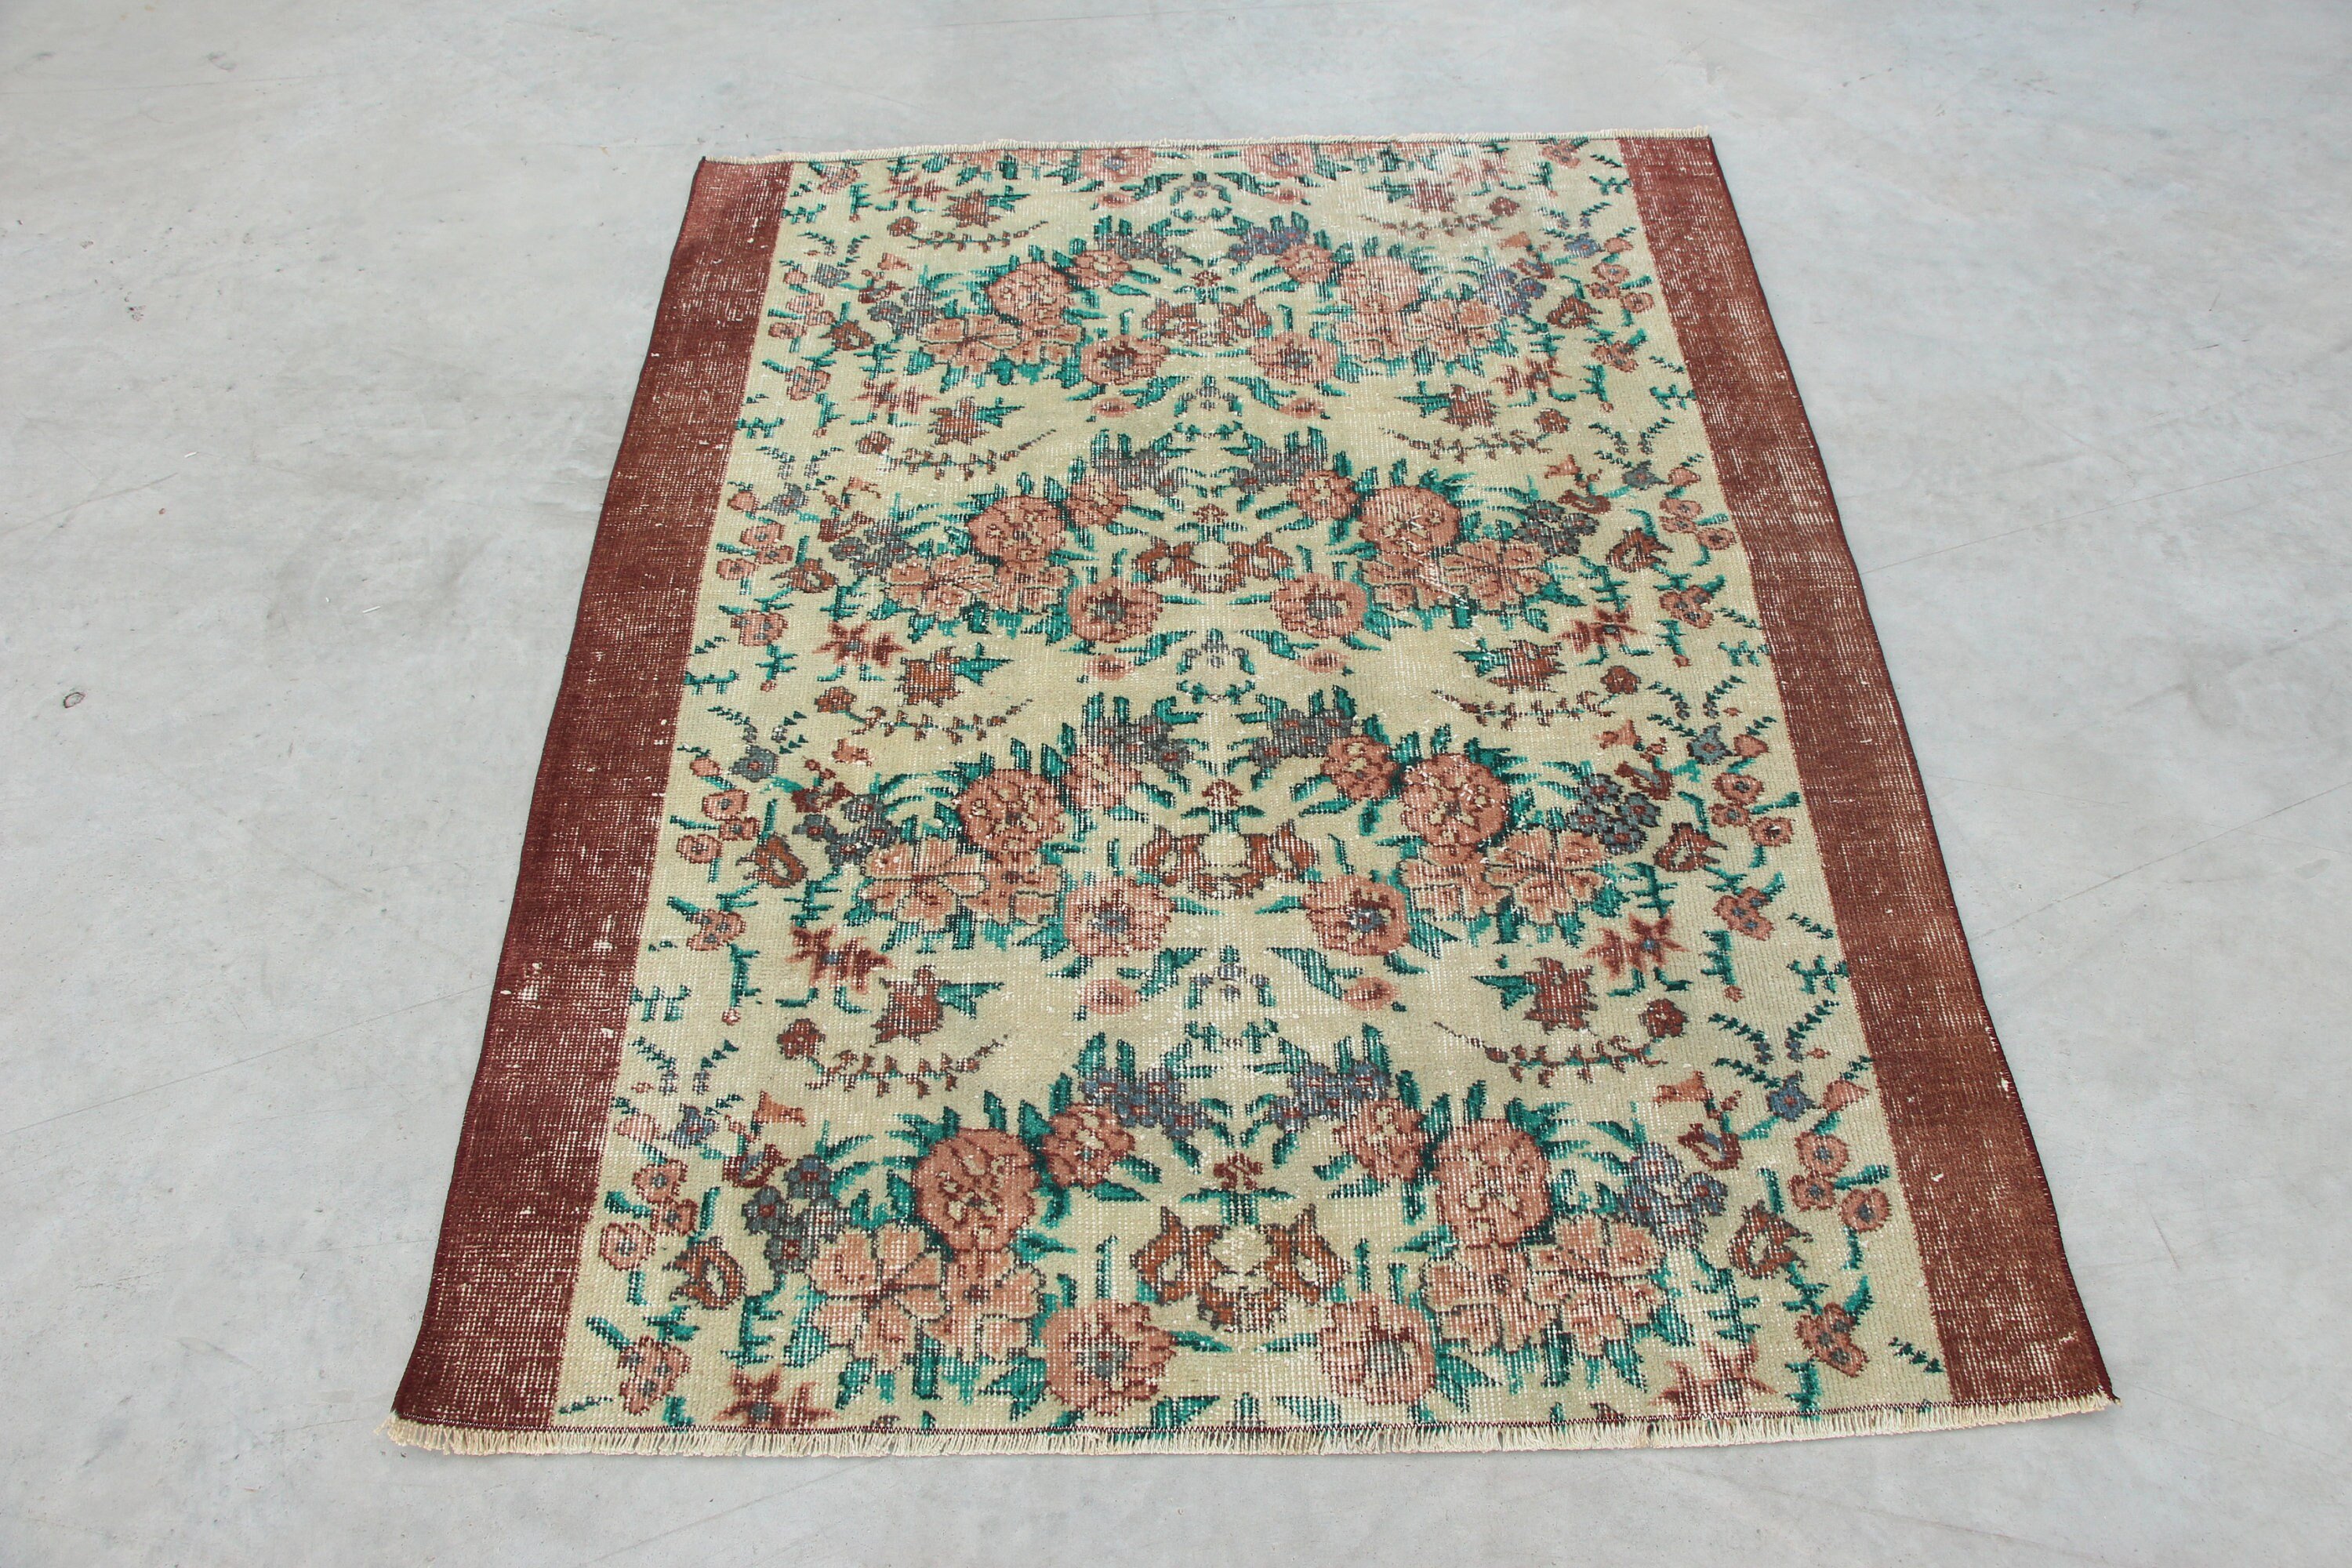 Eclectic Rugs, Kitchen Rug, Vintage Rug, Turkish Rugs, Beige Oriental Rugs, Entry Rug, Home Decor Rug, 3.8x4.8 ft Accent Rug